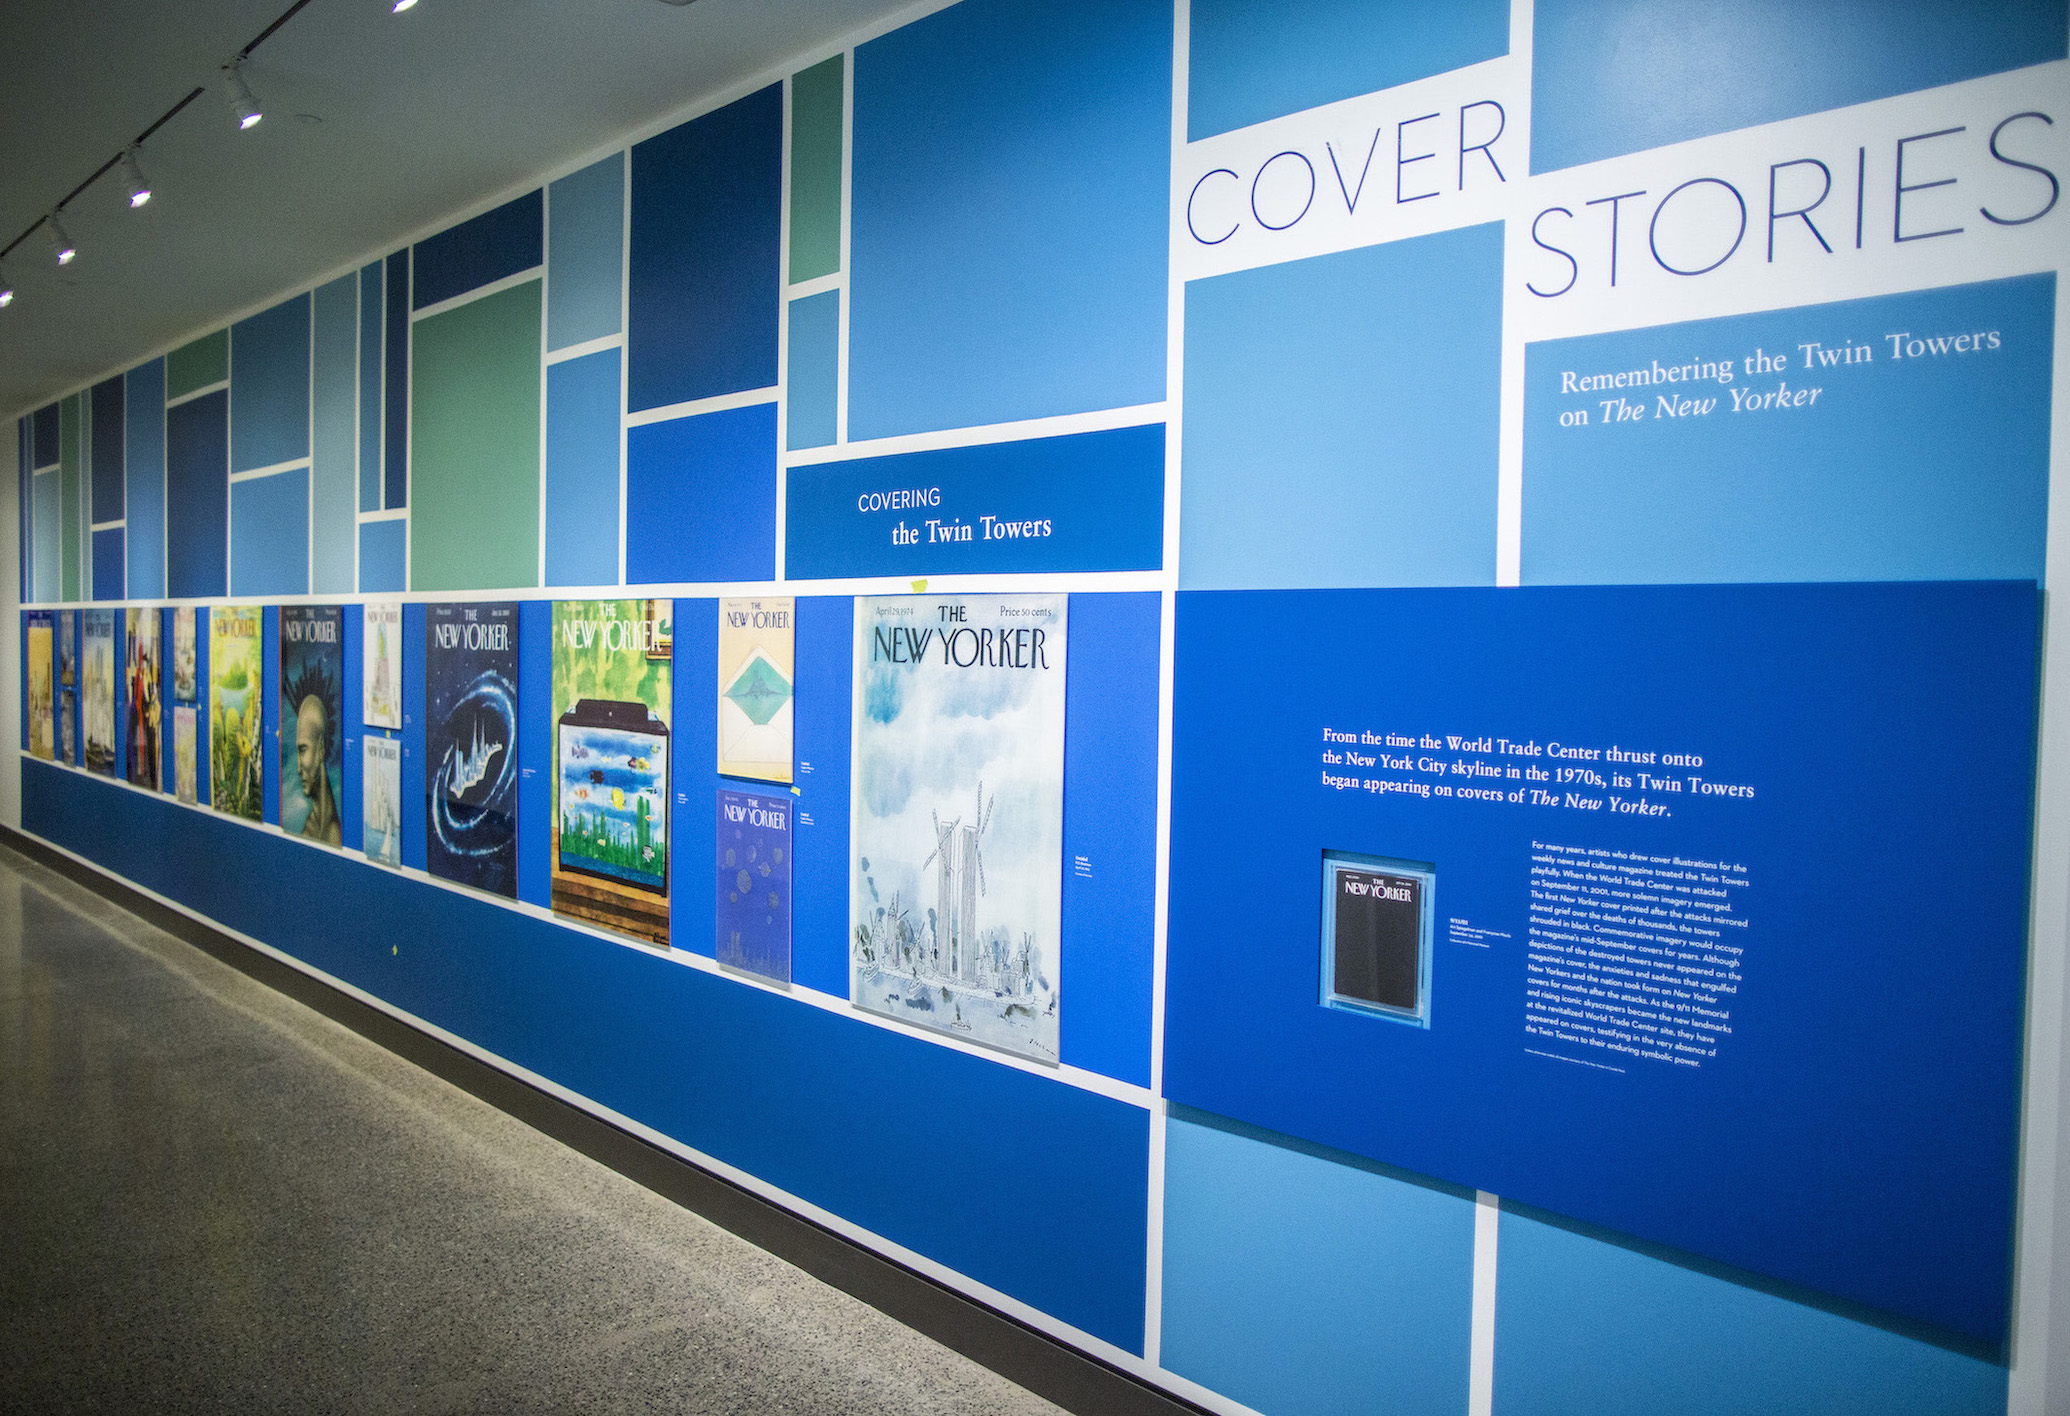 Images of Twin Towers–themed New Yorker covers are displayed on a wall as part of the exhibition Cover Stories. 